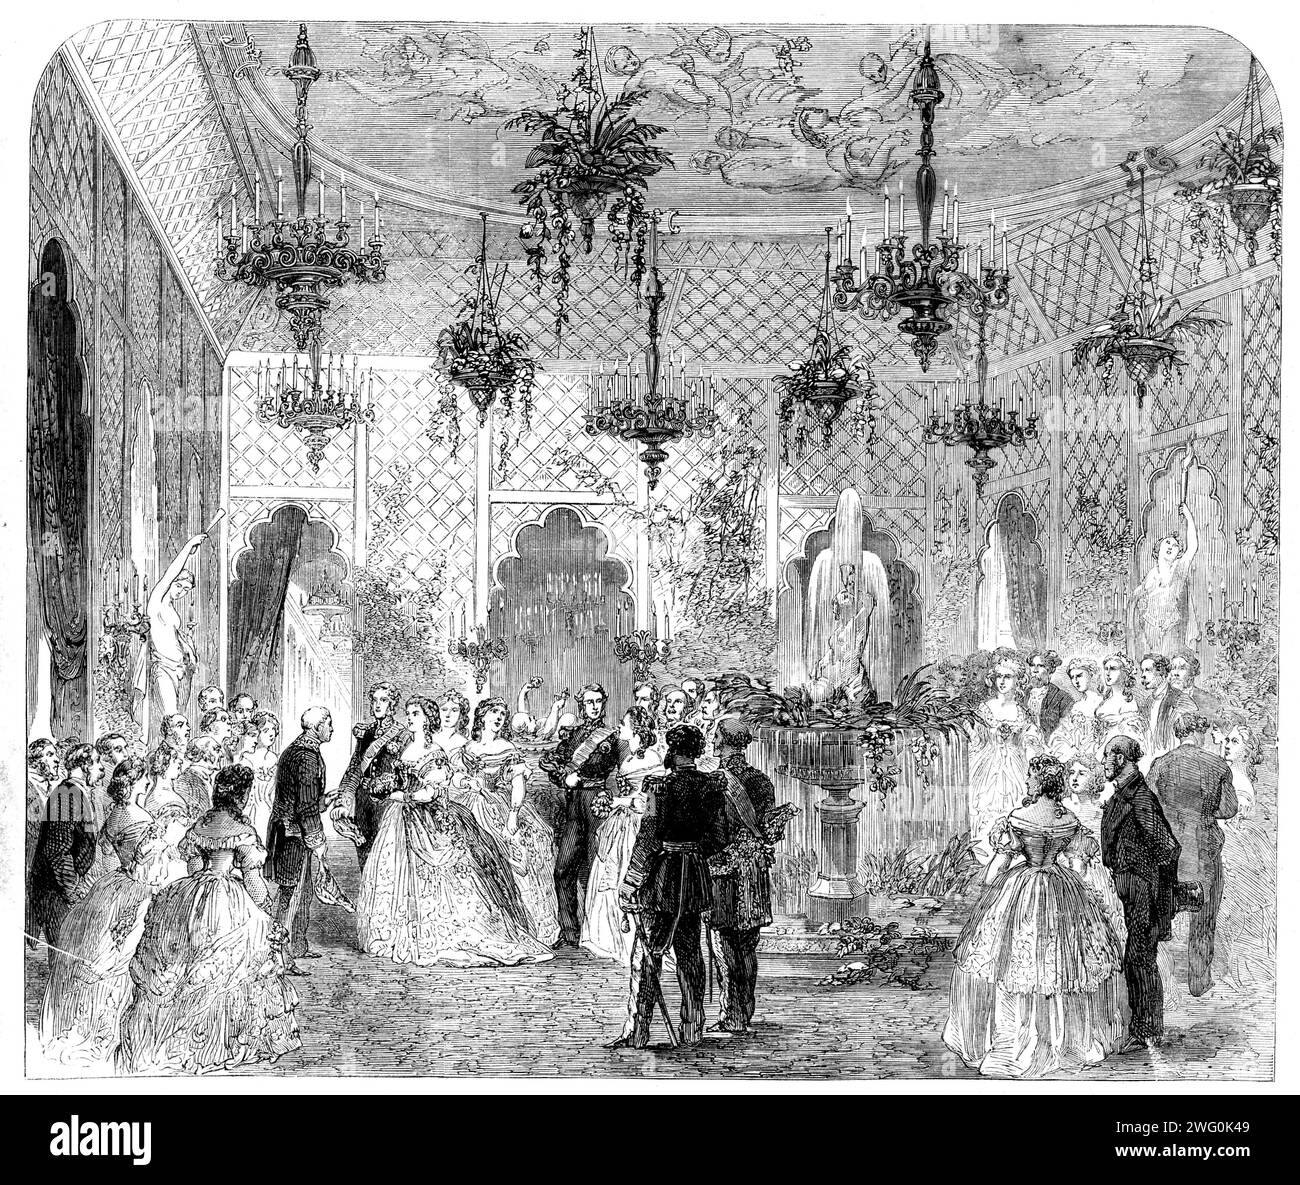 Soir&#xe9;e given...by the Burgomaster and Common Council of Brussels, at the Hotel de Ville, to the members of the Social Science Congress - from a sketch by Mr. Hendrikx, 1862. 'The scene...[in] the Salle Gothique at the moment of the entrance of the Duke and Duchess of Brabant and the Count of Flanders, and their reception by the Burgomaster. The Duke is the most prominent figure in the picture; her Royal and Imperial Highness is leaning upon his arm; the Count of Flandres is following, conducting one of the Court ladies. The two Princes were dressed in the uniform of a General. The Duchess Stock Photo